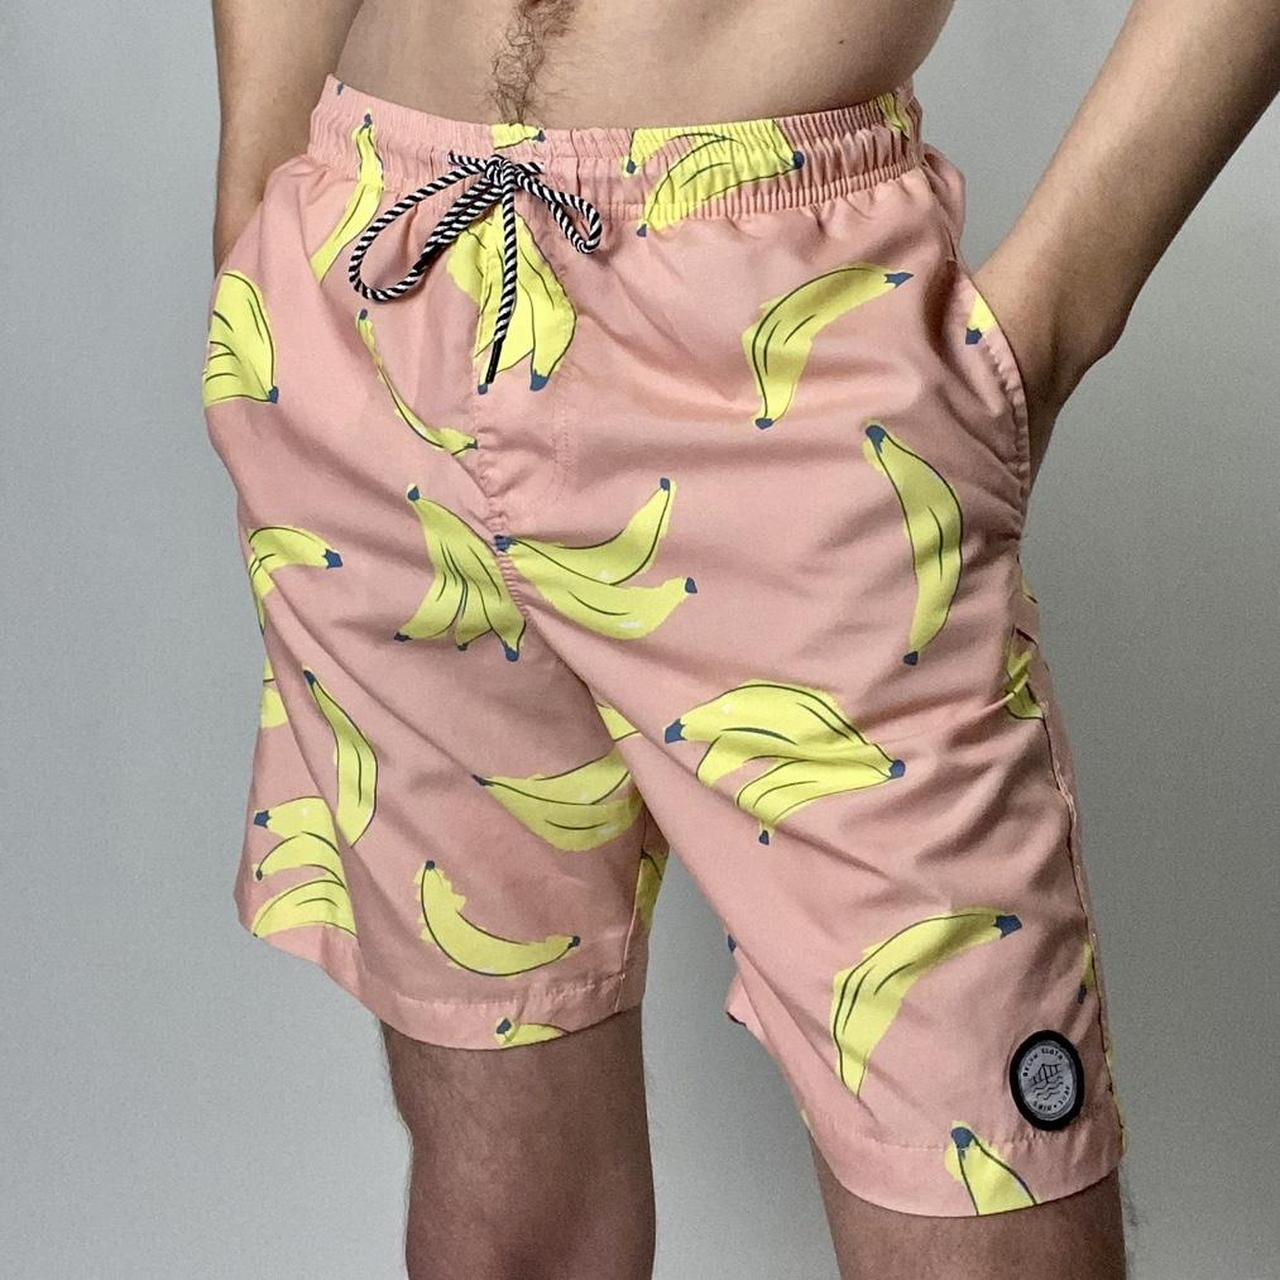 Pink and yellow Banana Swim Trunks 🍌 • made by... - Depop